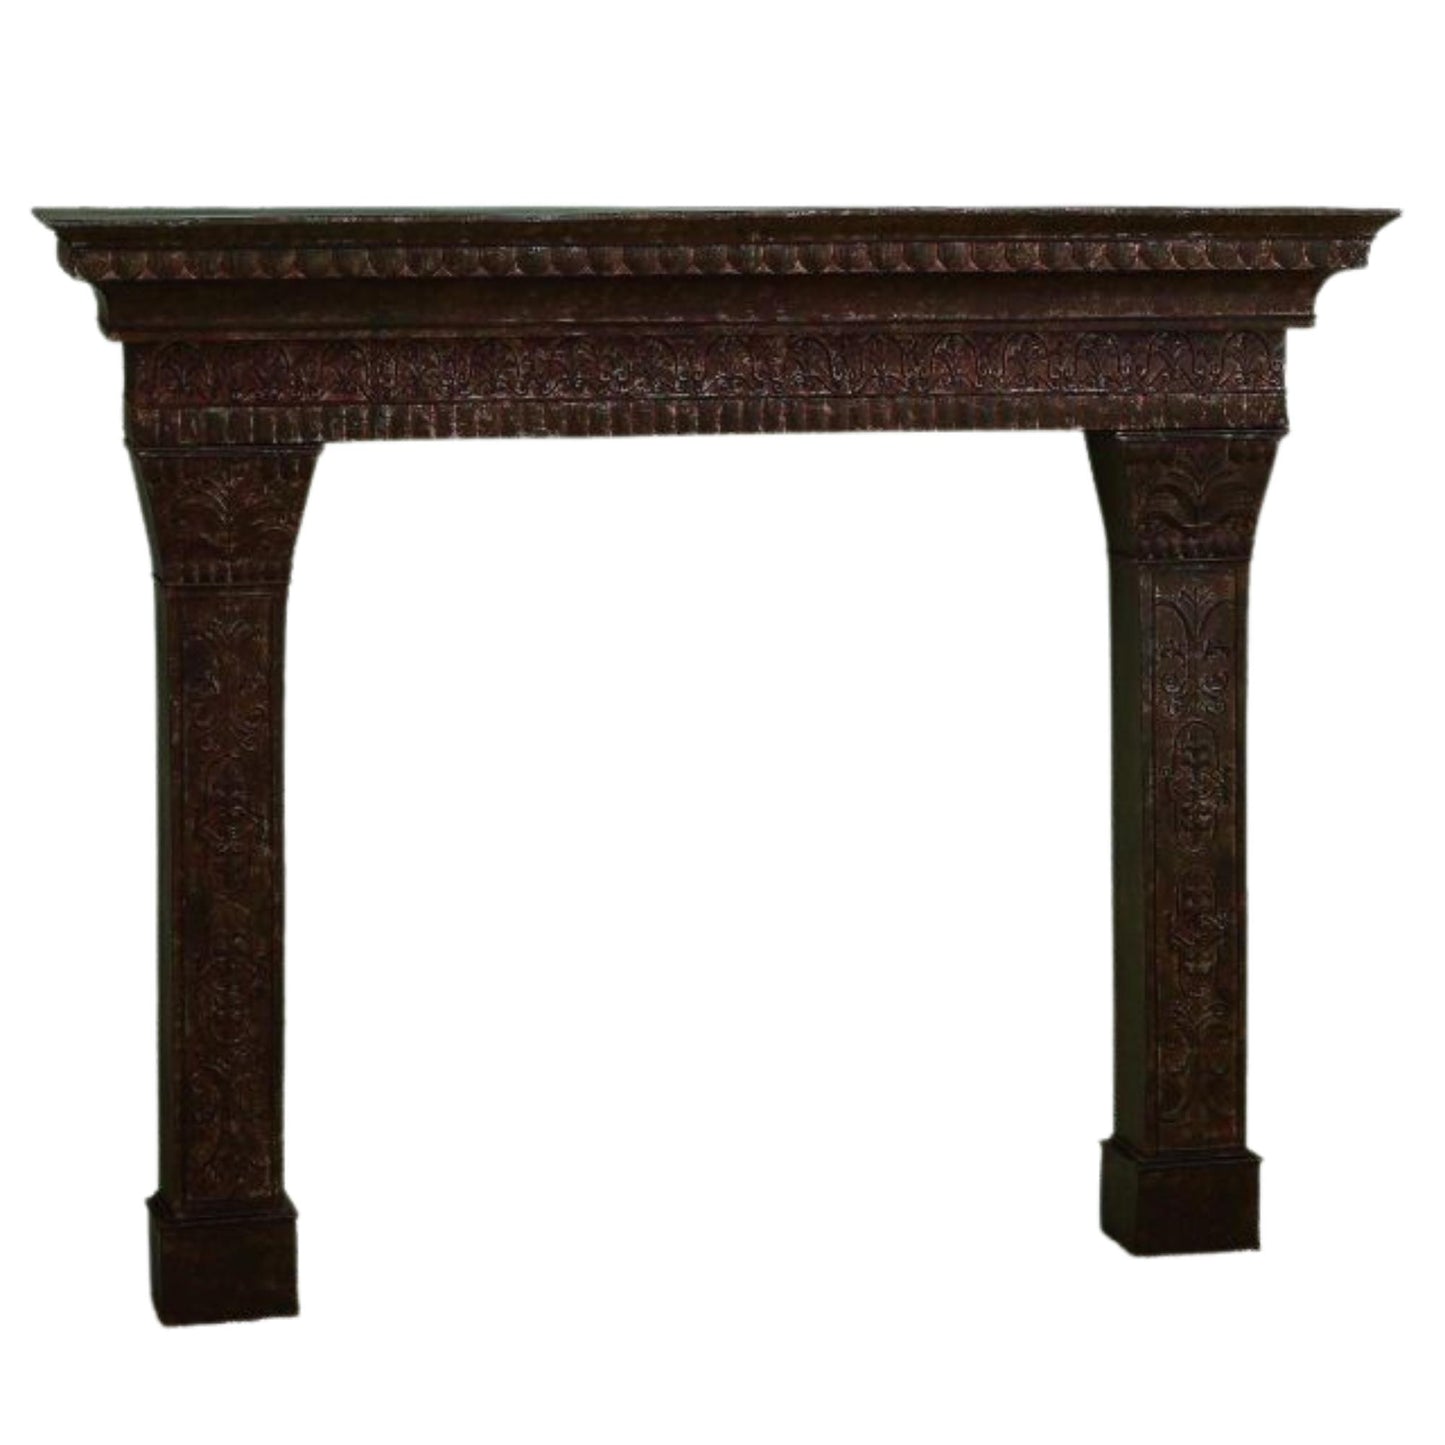 Iron Fireplace Mantle - Brown Taupe 3 Section Mantle | InsideOutCatalog.com